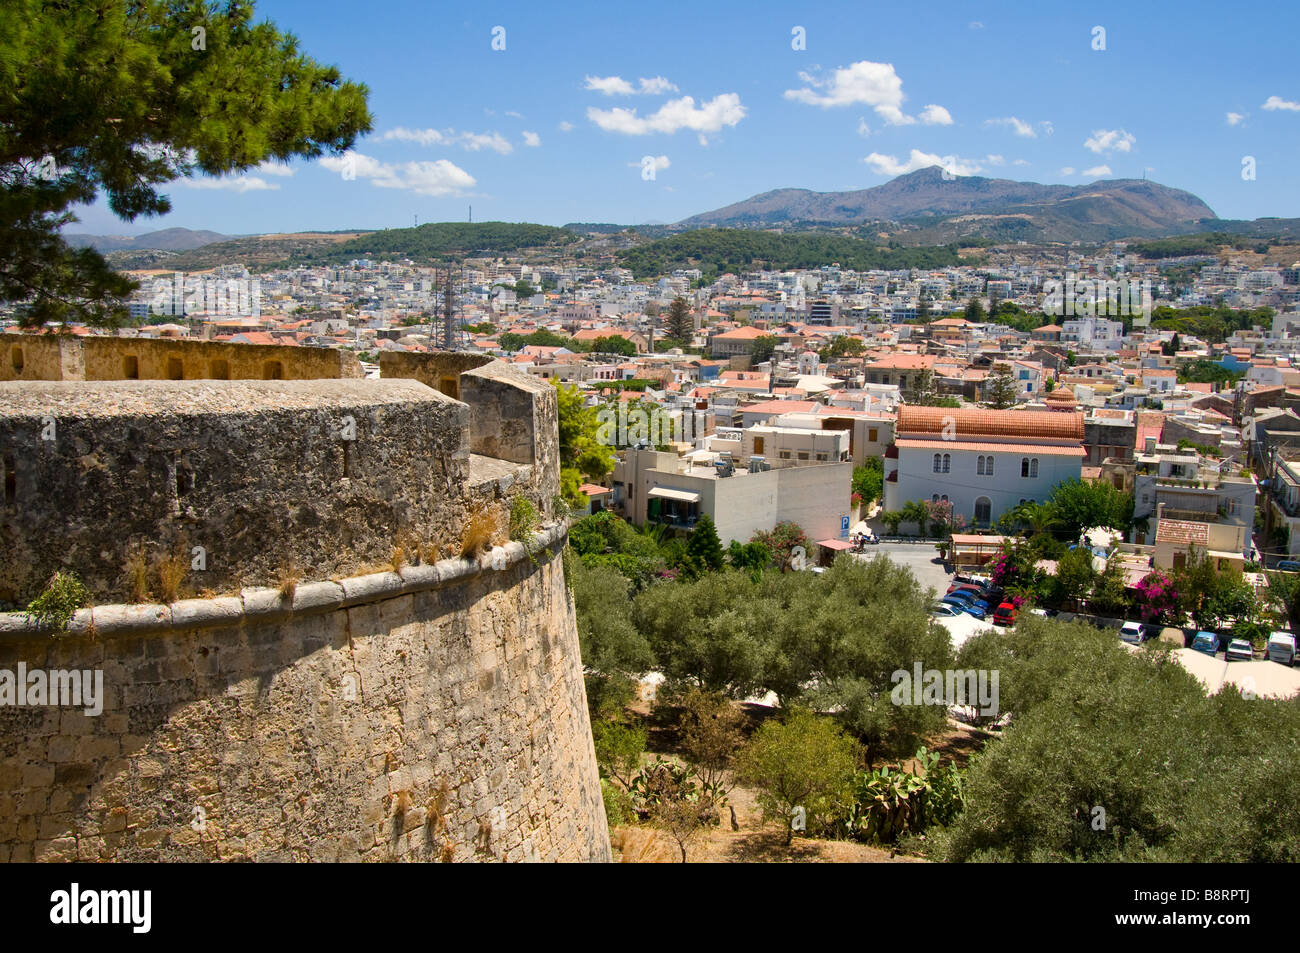 Rethymno / Rethimnon, Crete, Greece. View over town from the fort Stock Photo